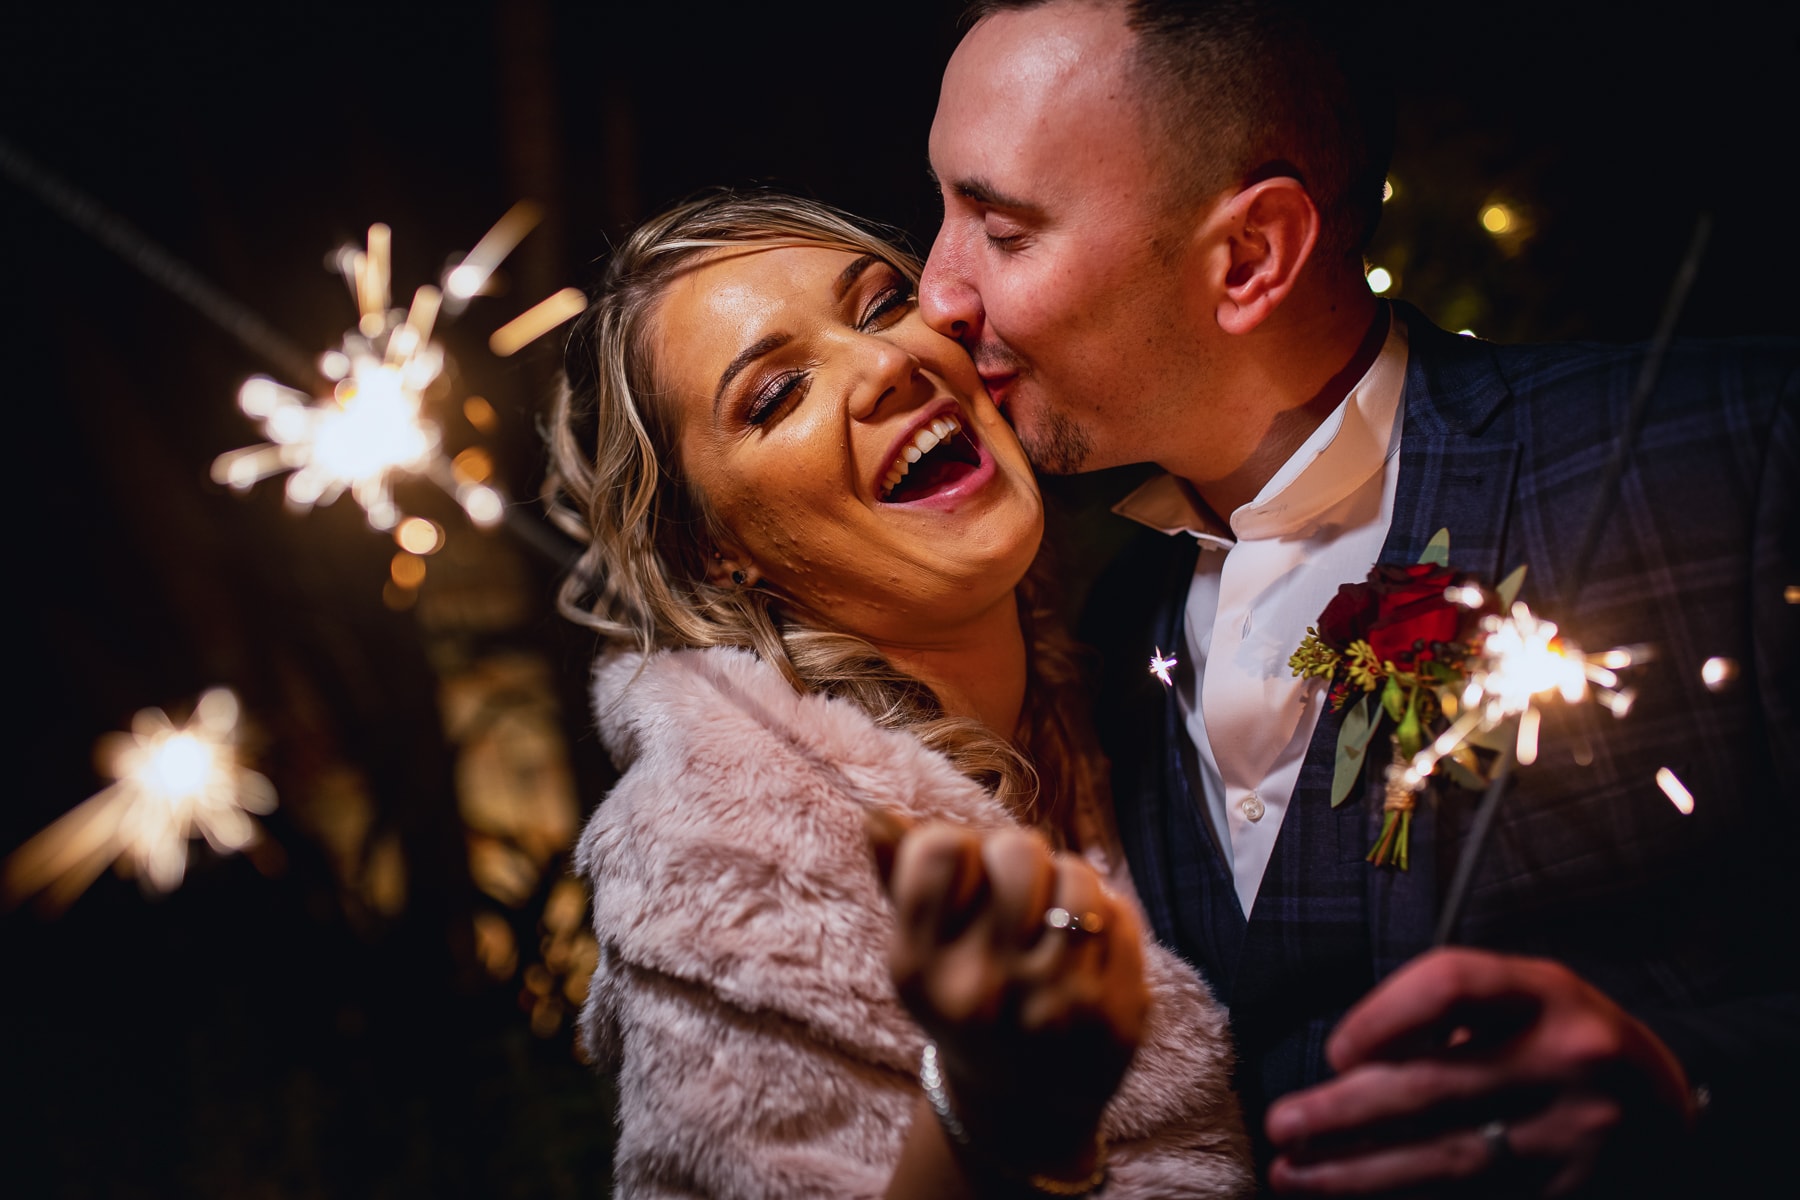 Winter wedding photography – Sparklers & Dogs (But not together!)